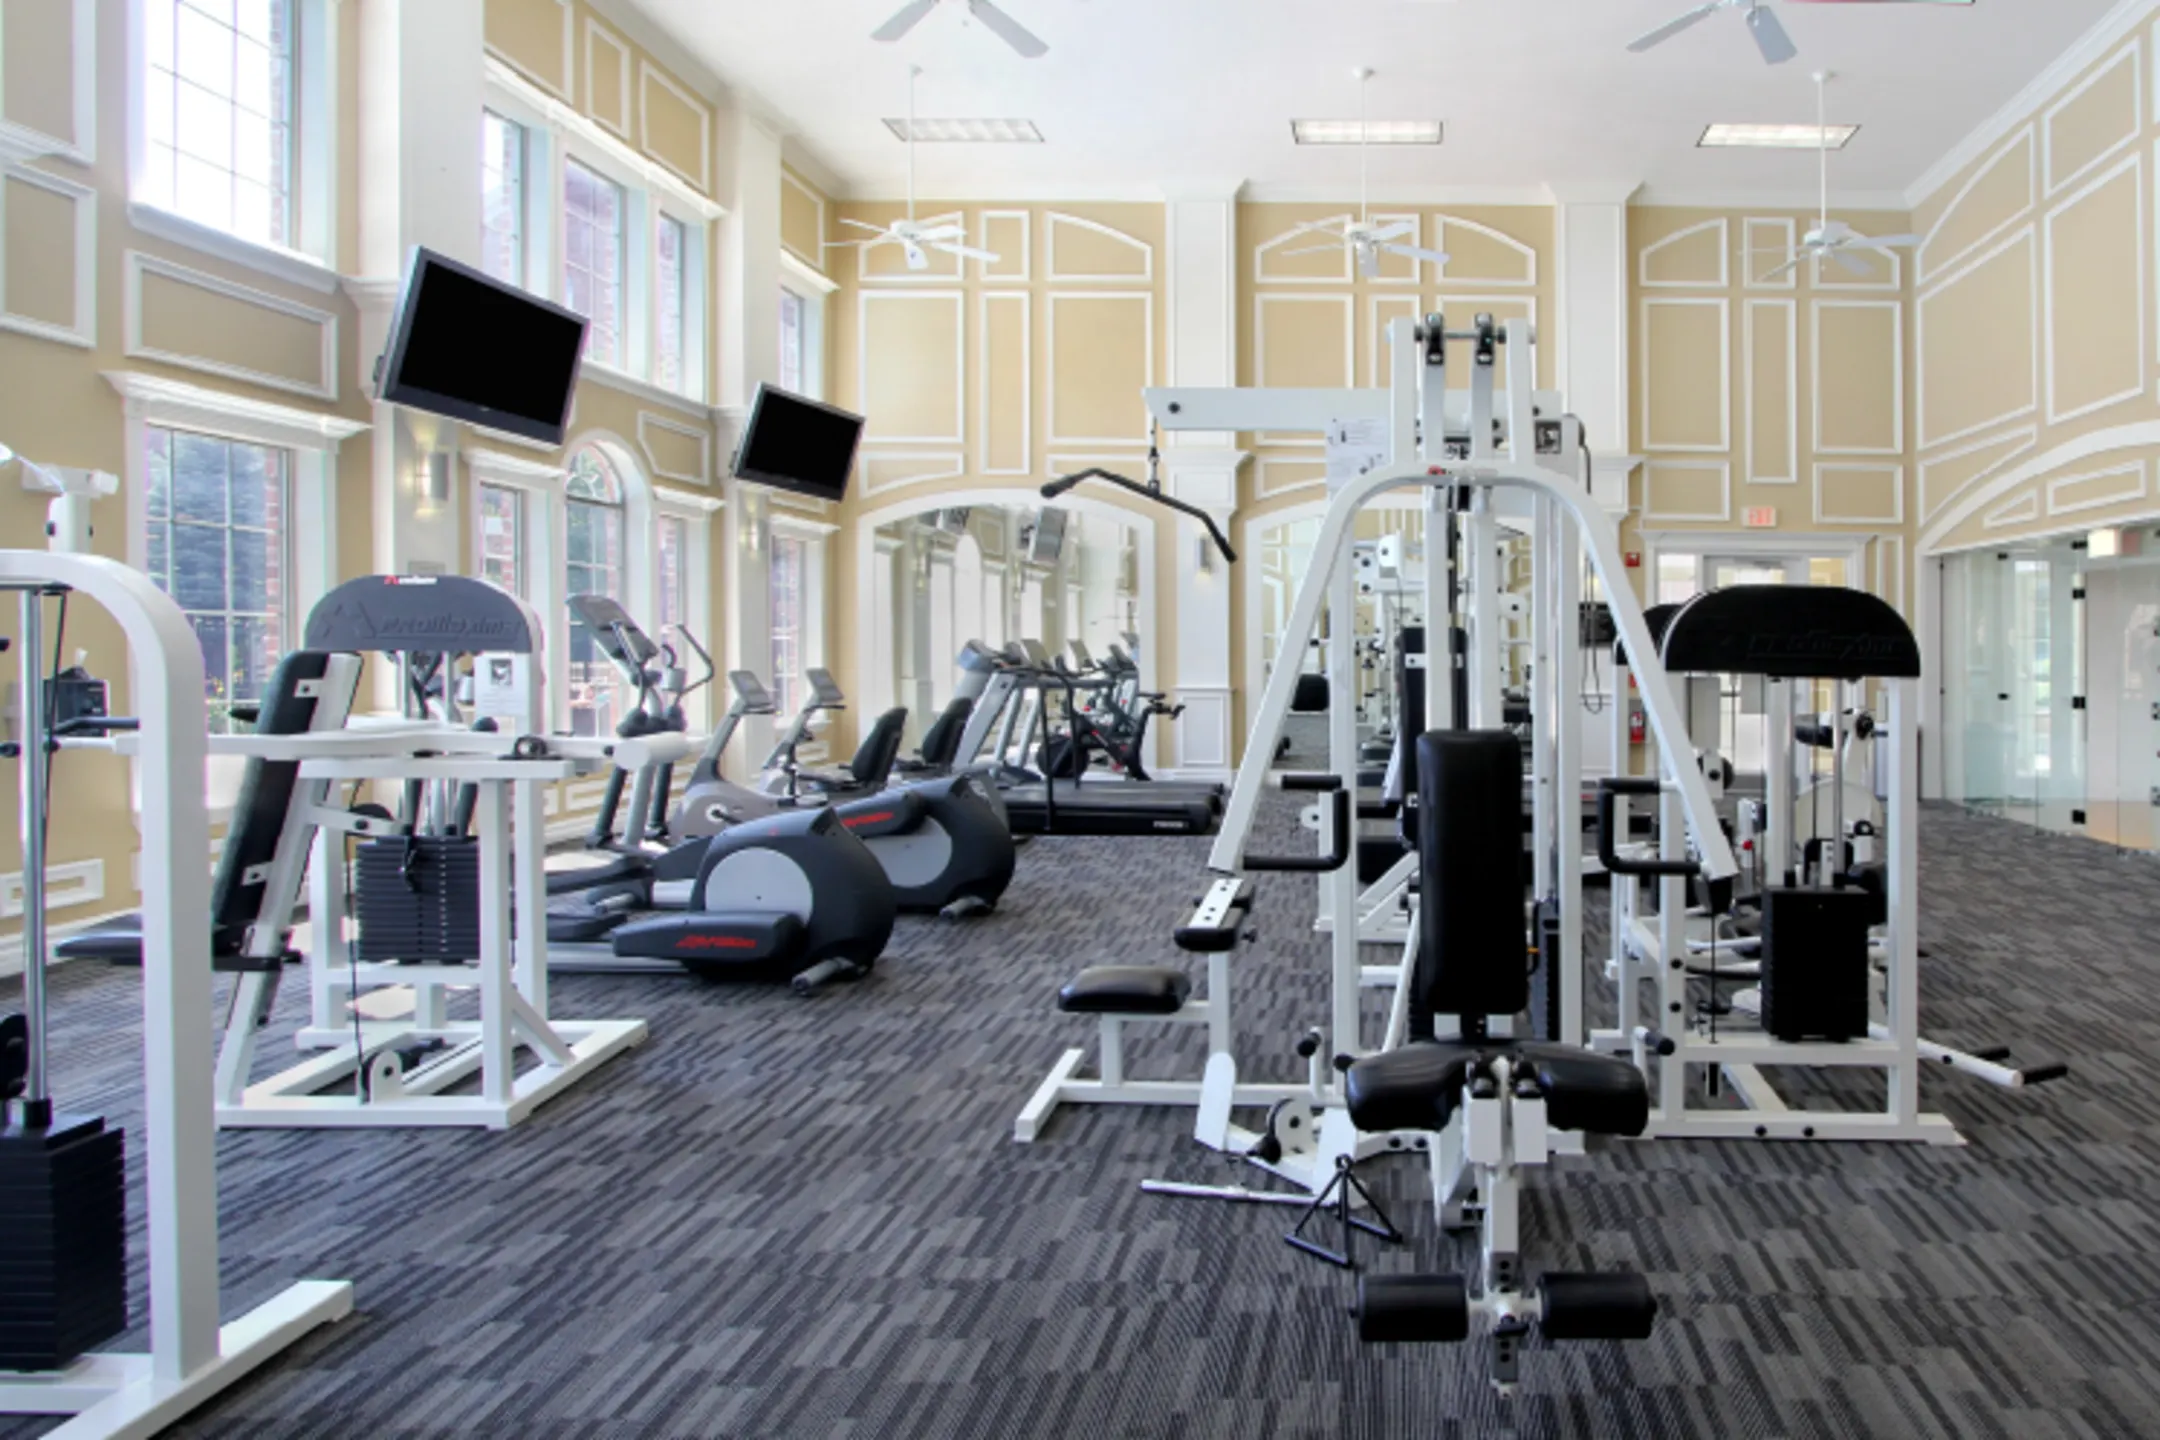 Fitness Weight Room - Turtlecreek Apartments - West Des Moines, IA